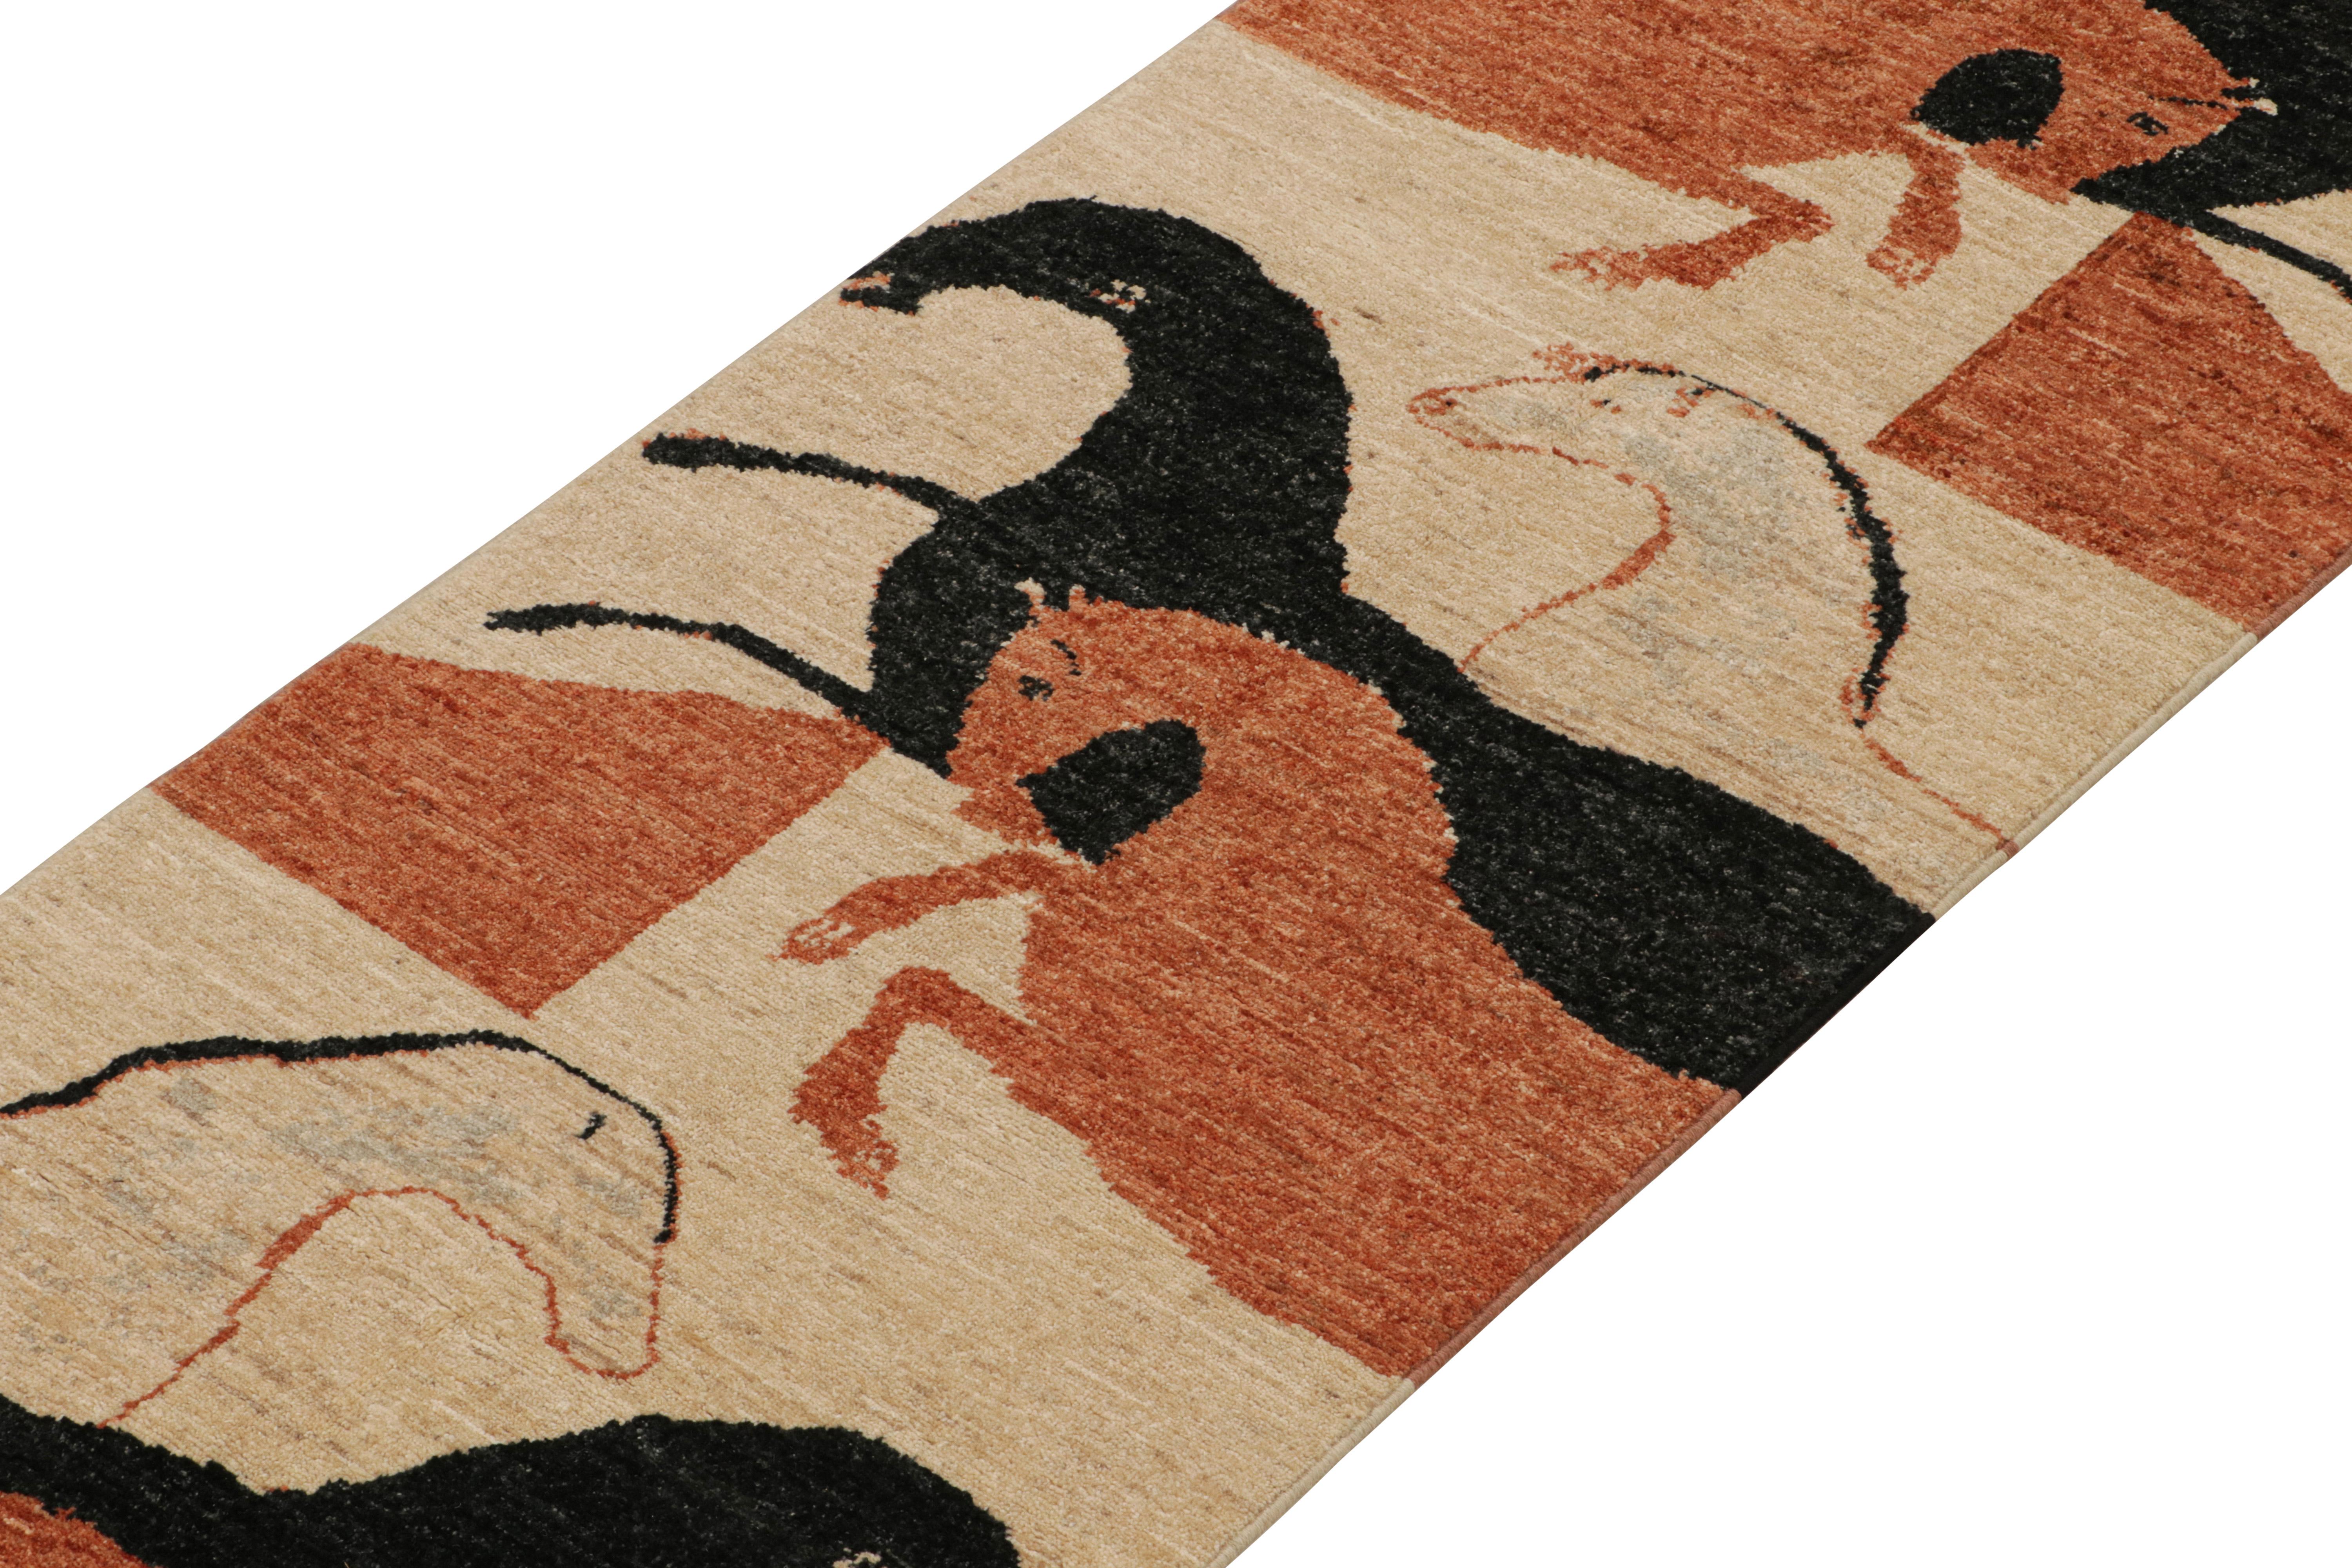 This new addition to Rug & Kilim’s Modern Classics collection is a 3x8 pictorial runner—a contemporary resurrection of one of the most collectible primitivist styles. 

Further on the Design:

Hand-knotted in wool, this piece is inspired by Gabbeh